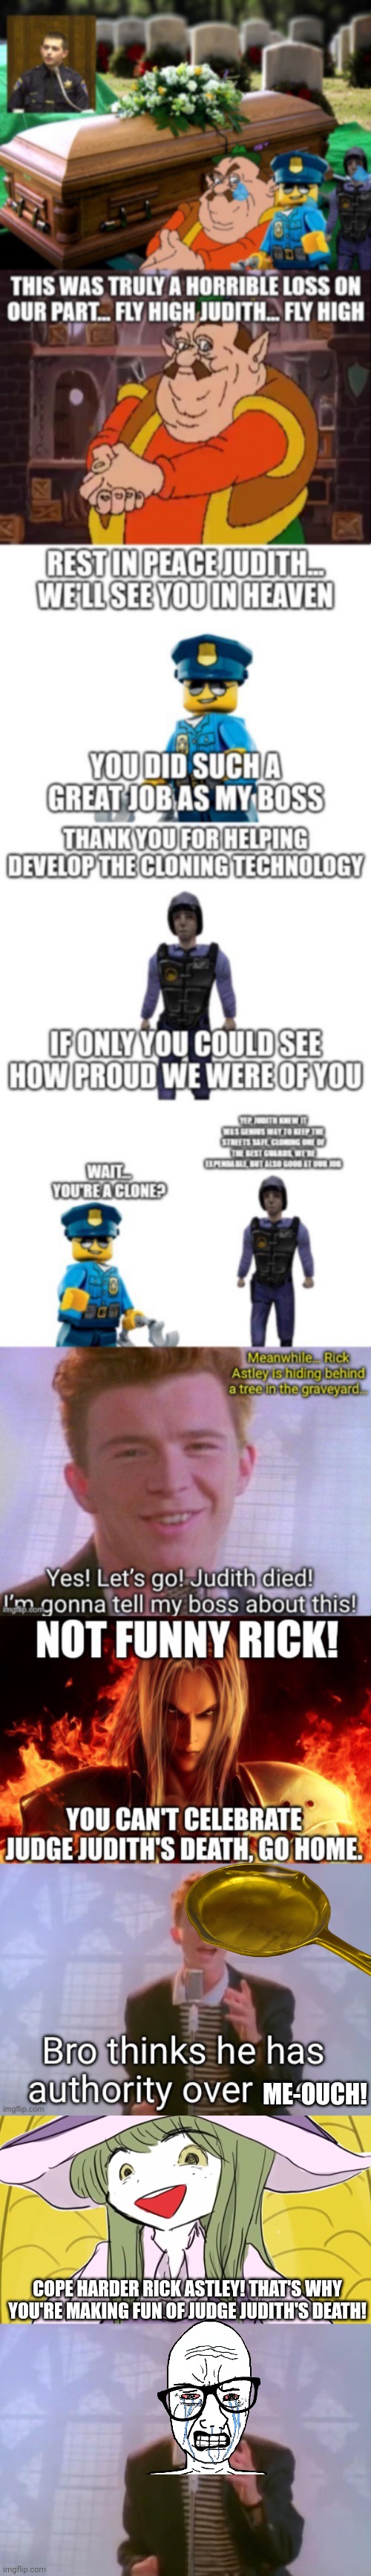 Toyohime Bangs Rick Astley with a frying pan and convinces him to cope harder | ME-OUCH! COPE HARDER RICK ASTLEY! THAT'S WHY YOU'RE MAKING FUN OF JUDGE JUDITH'S DEATH! | image tagged in rick astley | made w/ Imgflip meme maker